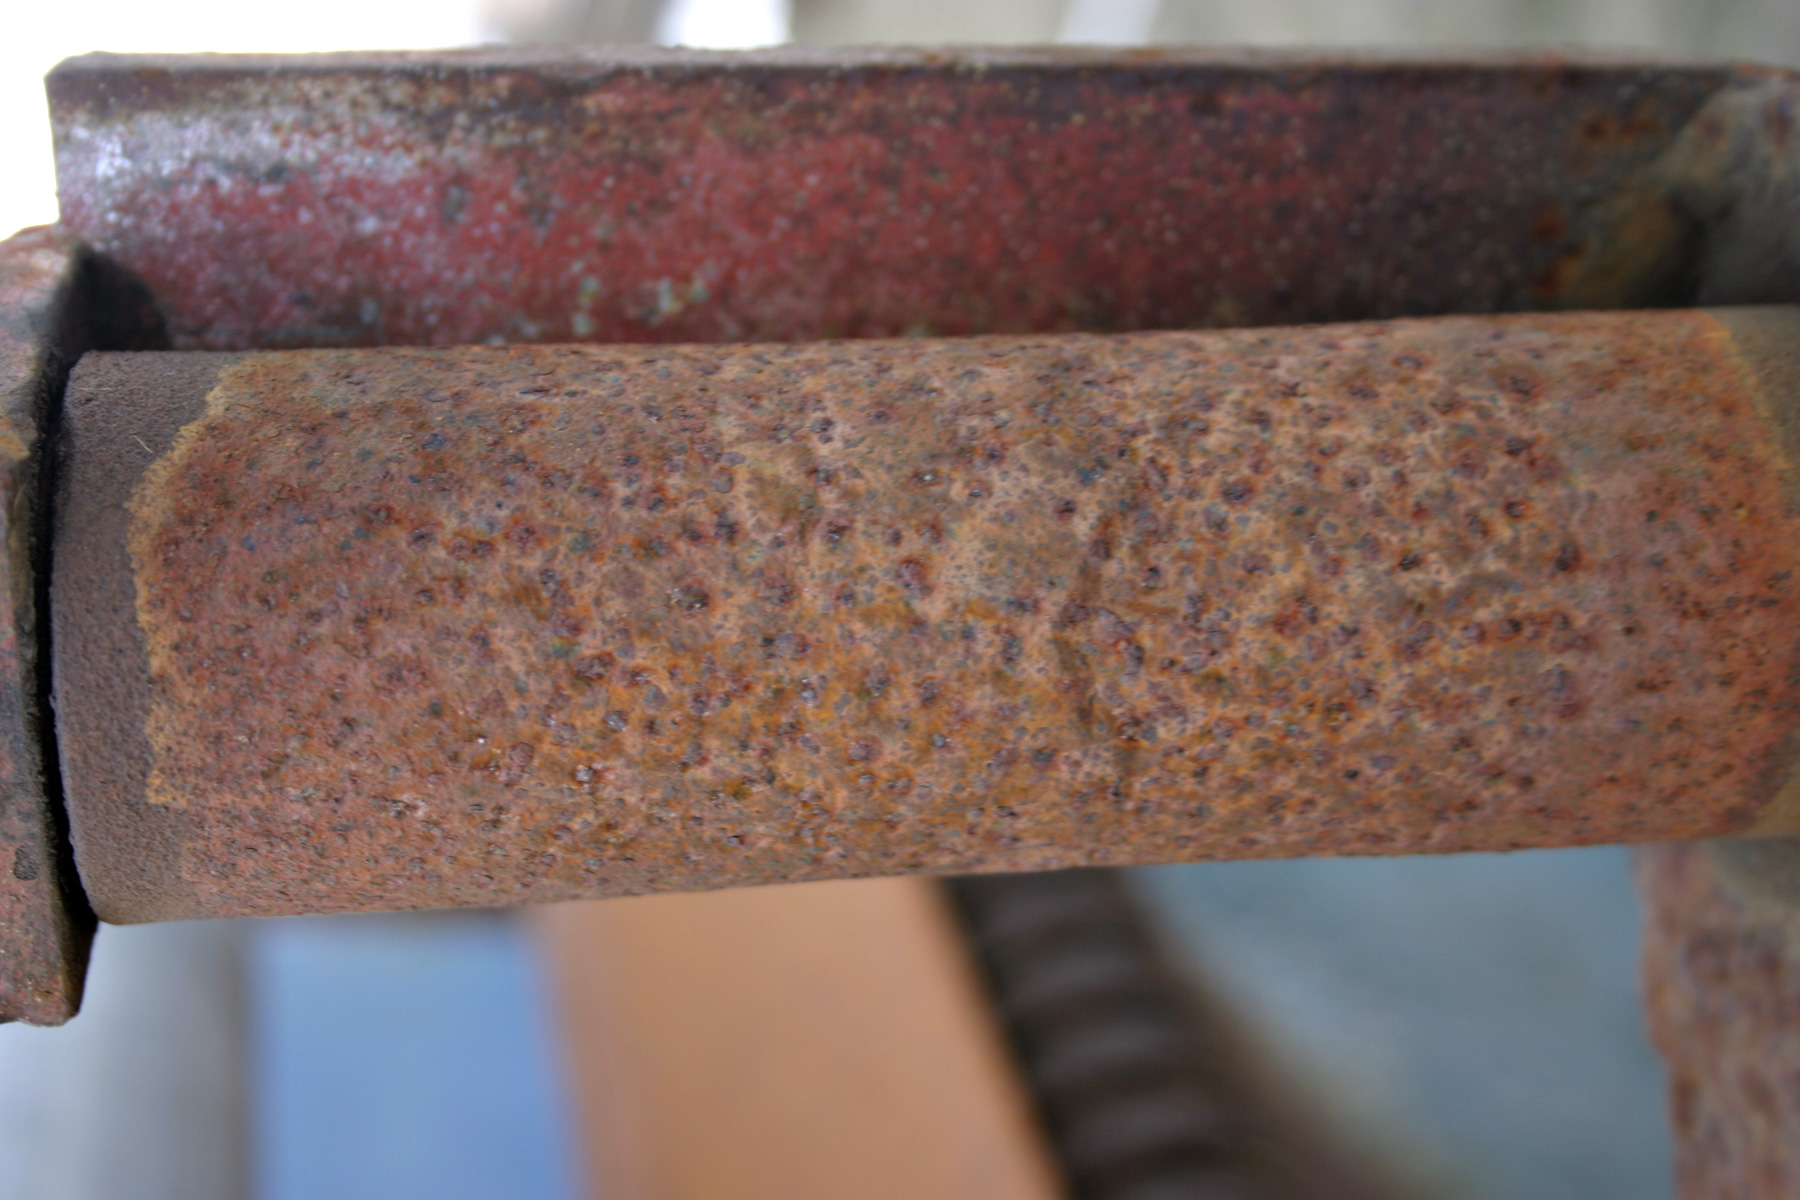 Rusted metal pipe photo